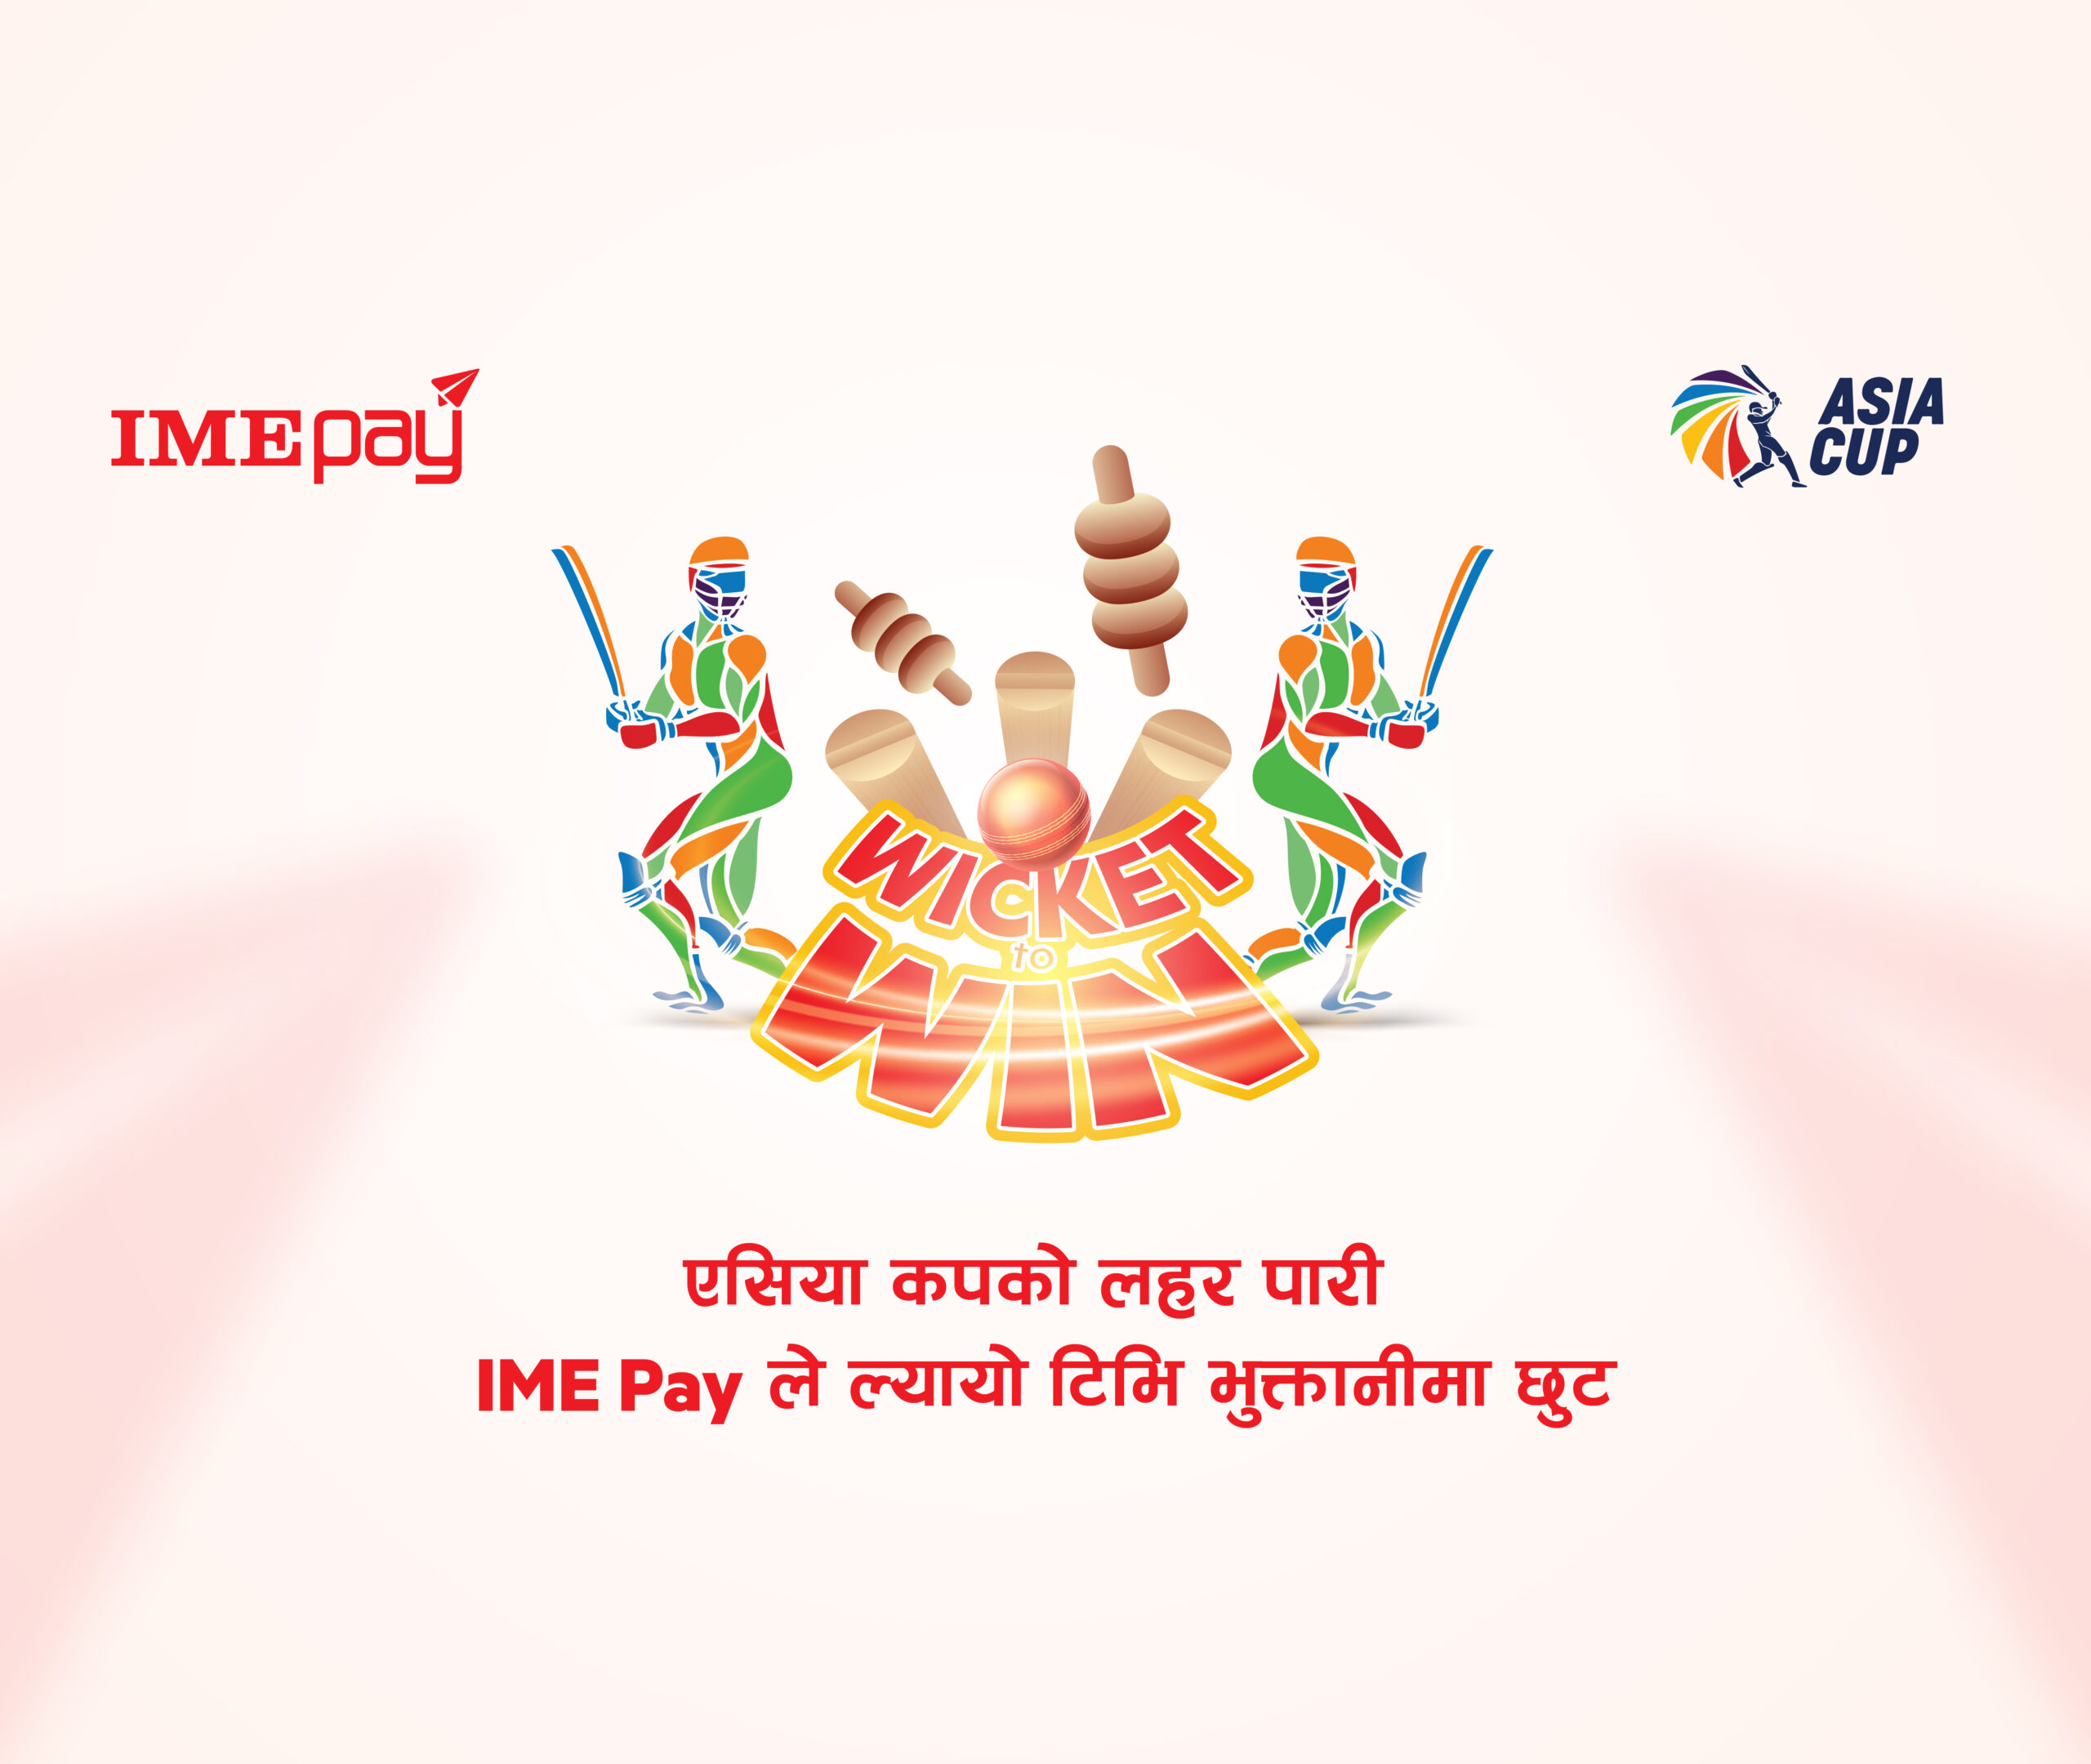 IME Pay introduced an offer called “Wicket to Win”